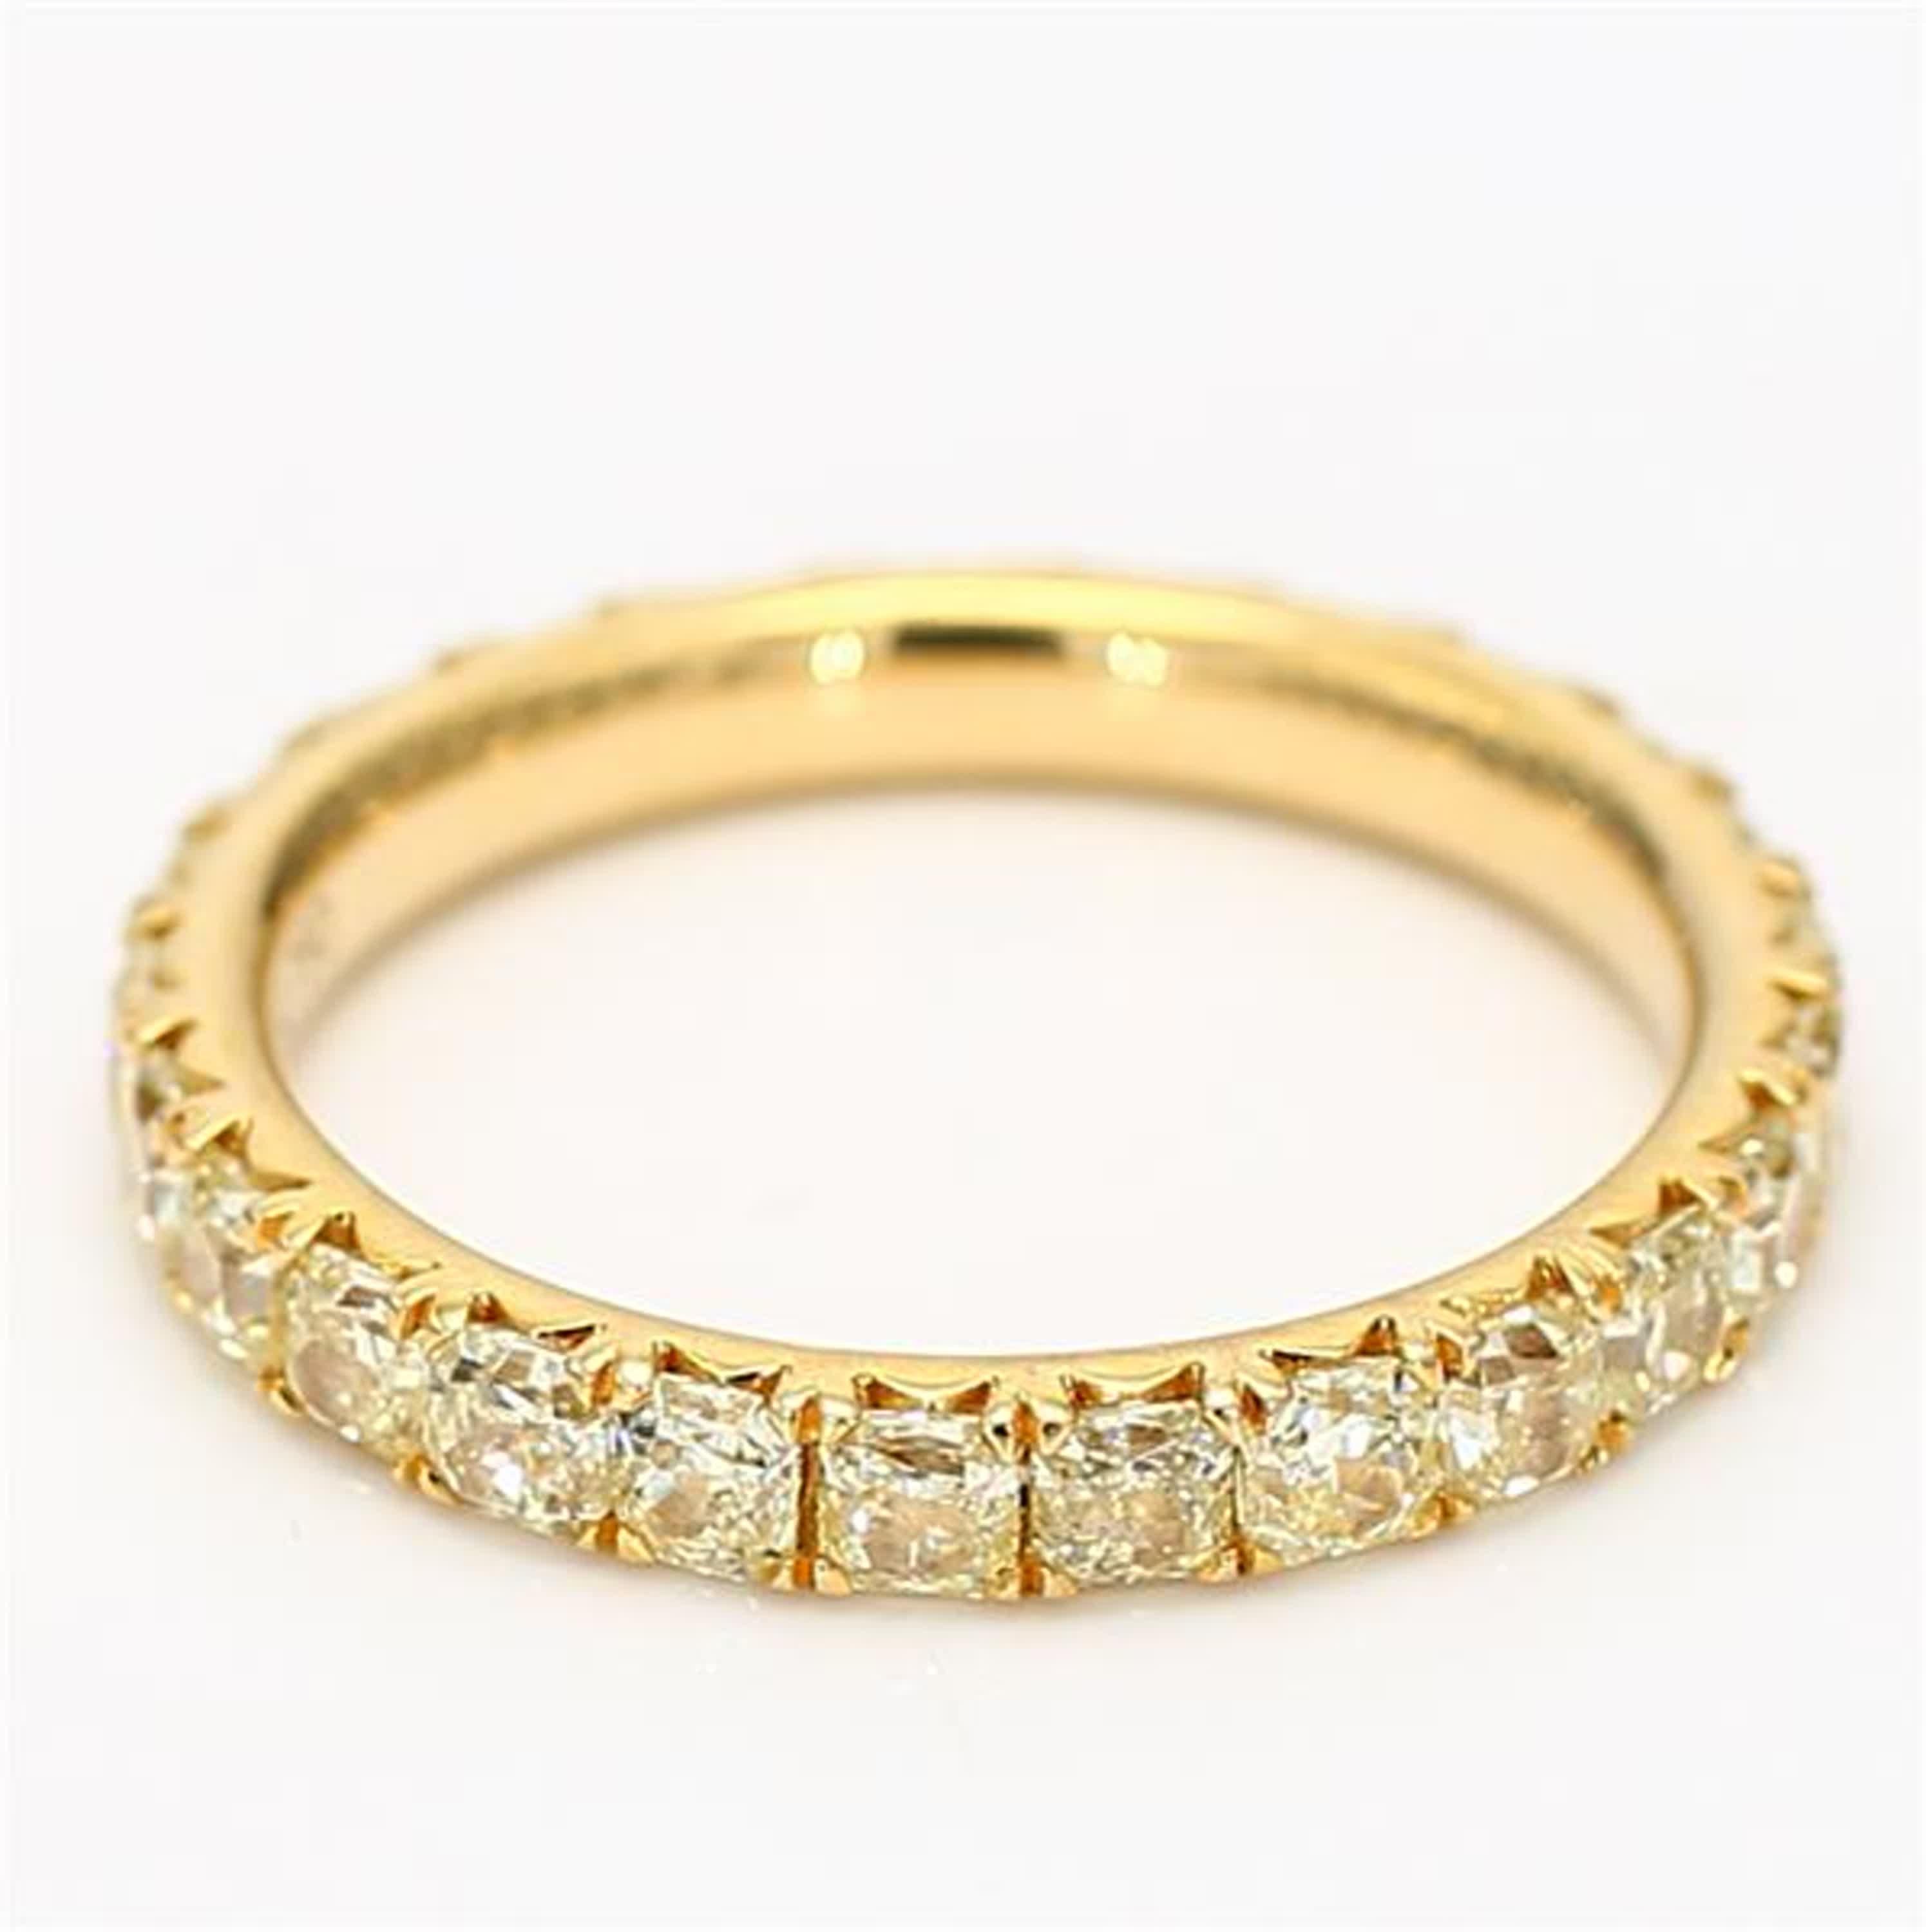 Radiant Cut Natural Yellow Radiant Diamond 1.99 Carat TW Yellow Gold Eternity Band For Sale